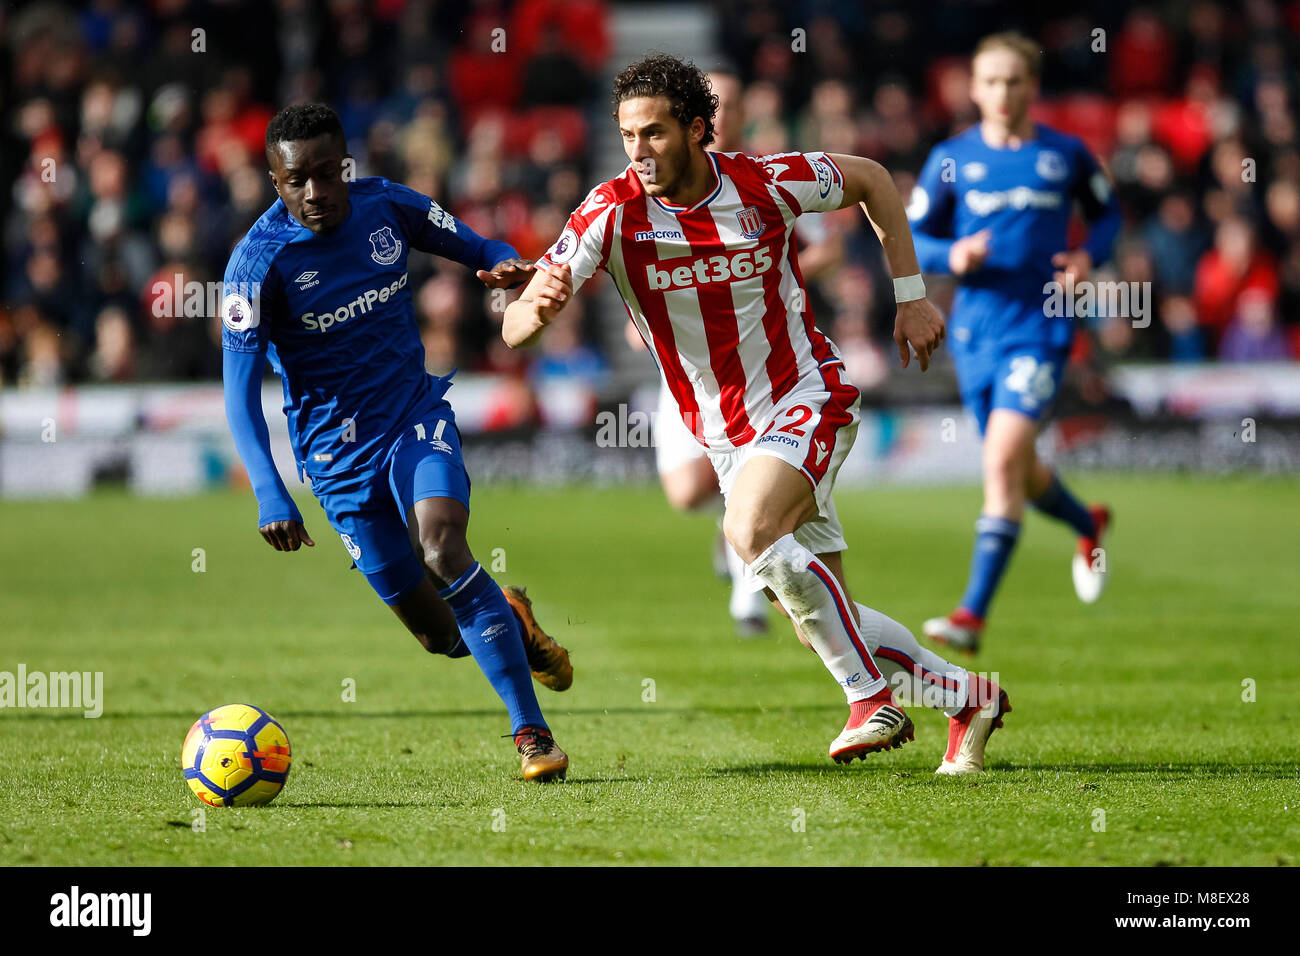 Stoke-on-Trent, UK, 17 Mar 2018. Idrissa Gueye of Everton and Ramadan Sobhi of Stoke City during the Premier League match between Stoke City and Everton at Bet365 Stadium on March 17th 2018 in Stoke-on-Trent, England. (Photo by Daniel Chesterton/phcimages.com) Stock Photo